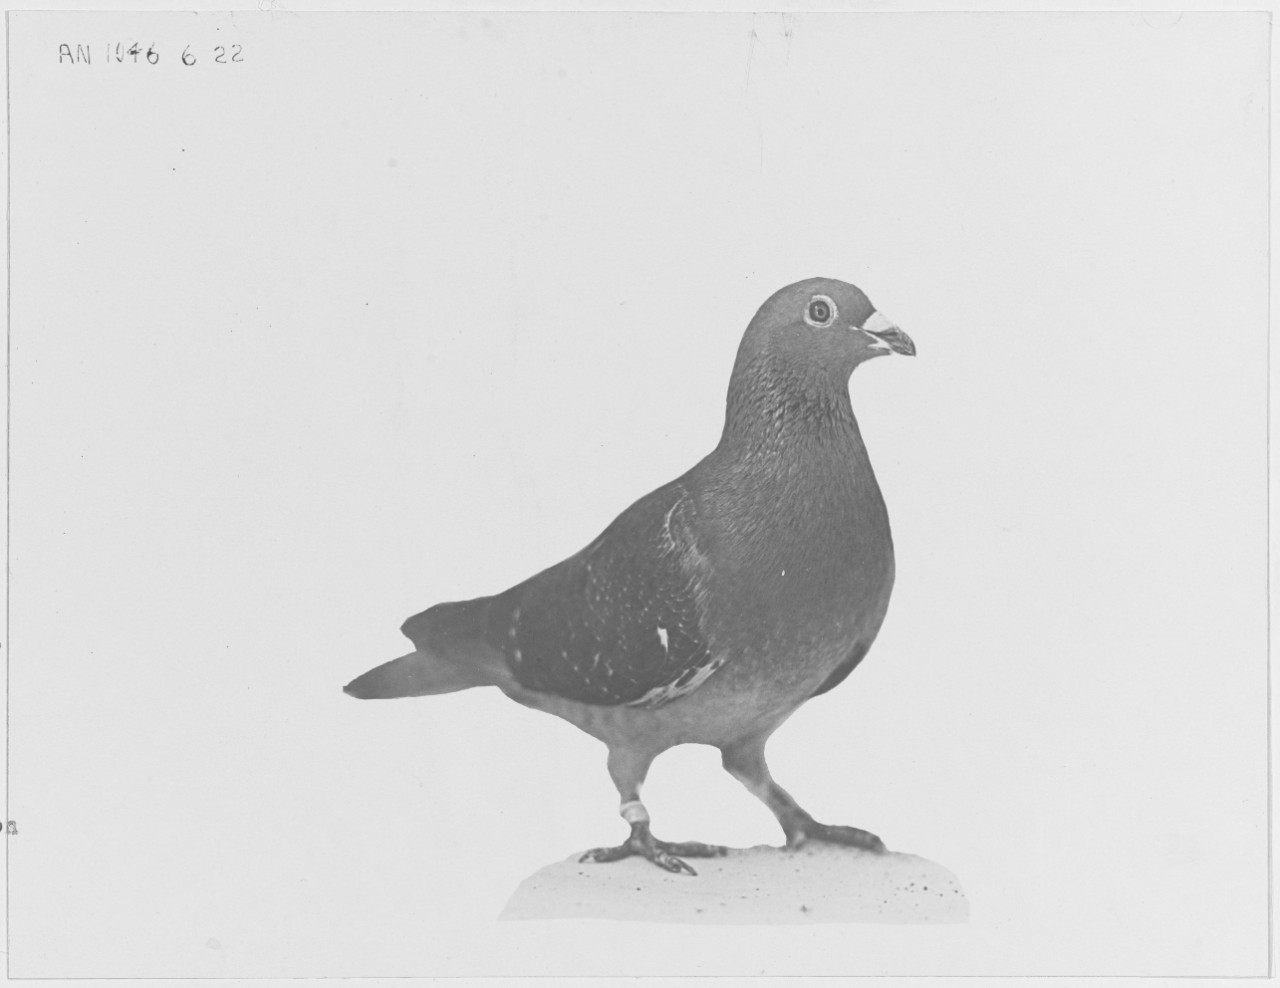 Carrier Pigeon "LIGHTNING", with over 10,000 miles to his credit